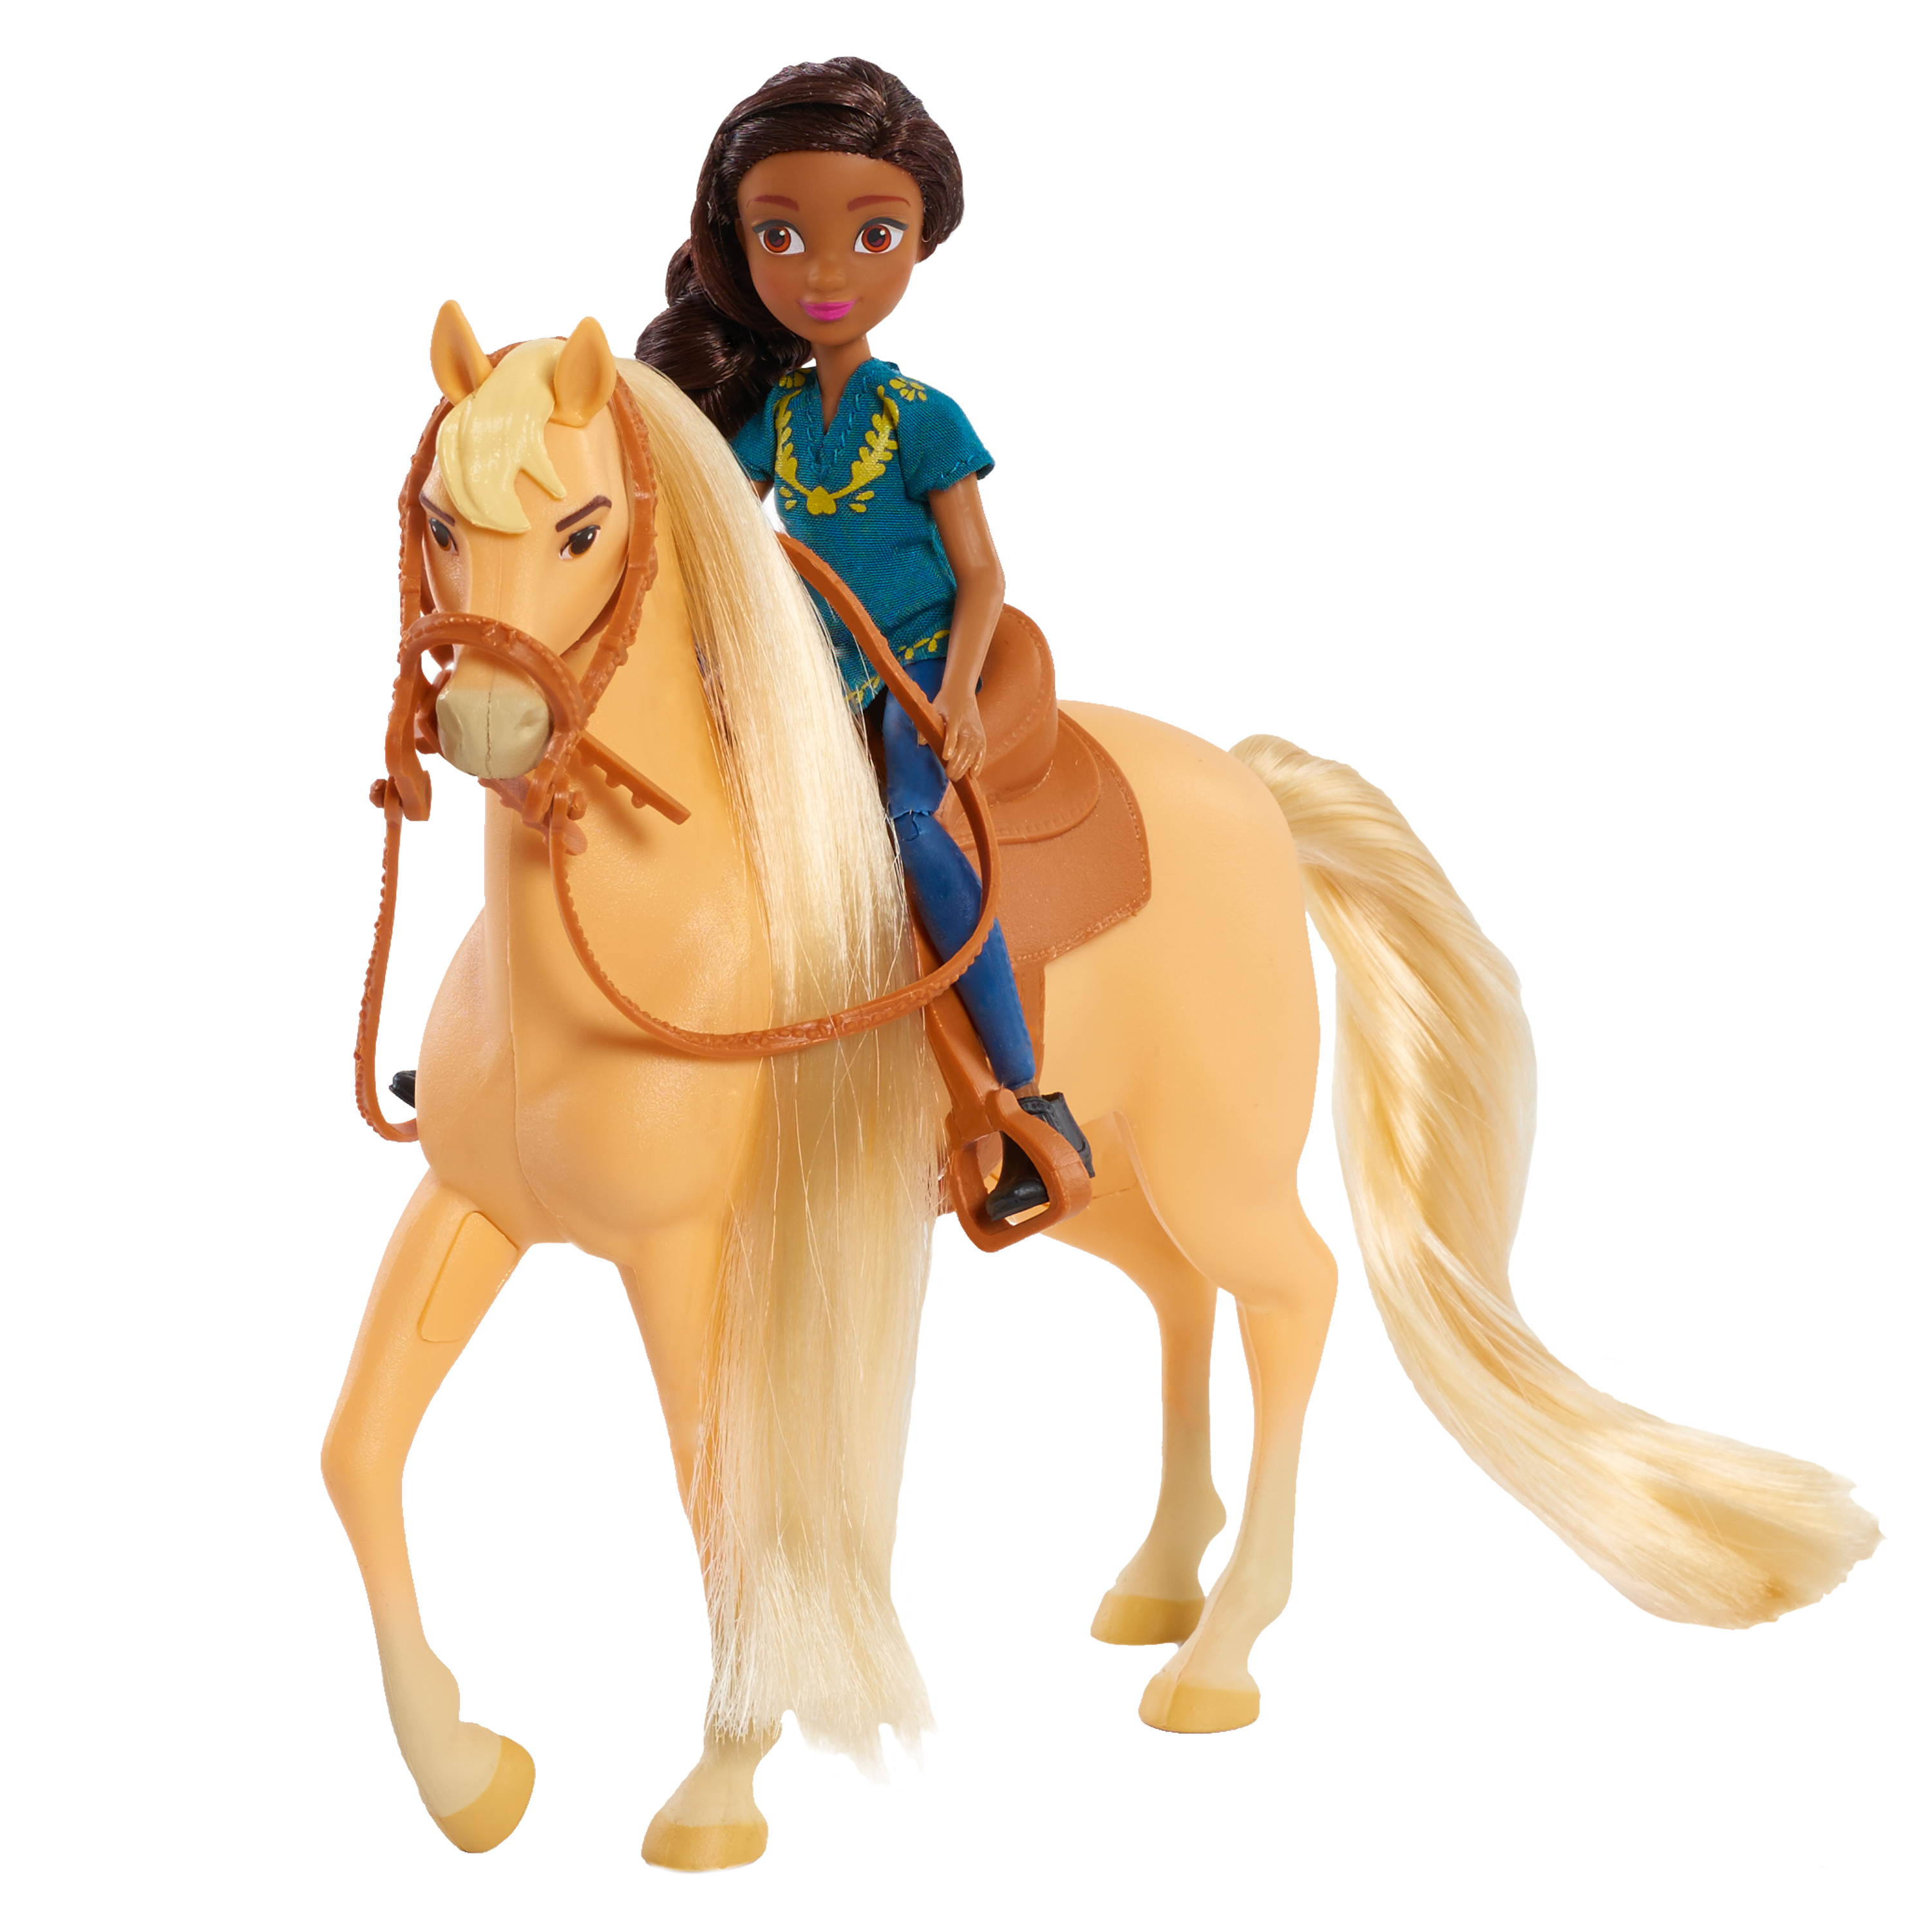 Spirit Riding Free Small Doll and Horse Set - Pru & Chica Linda - image 1 of 4